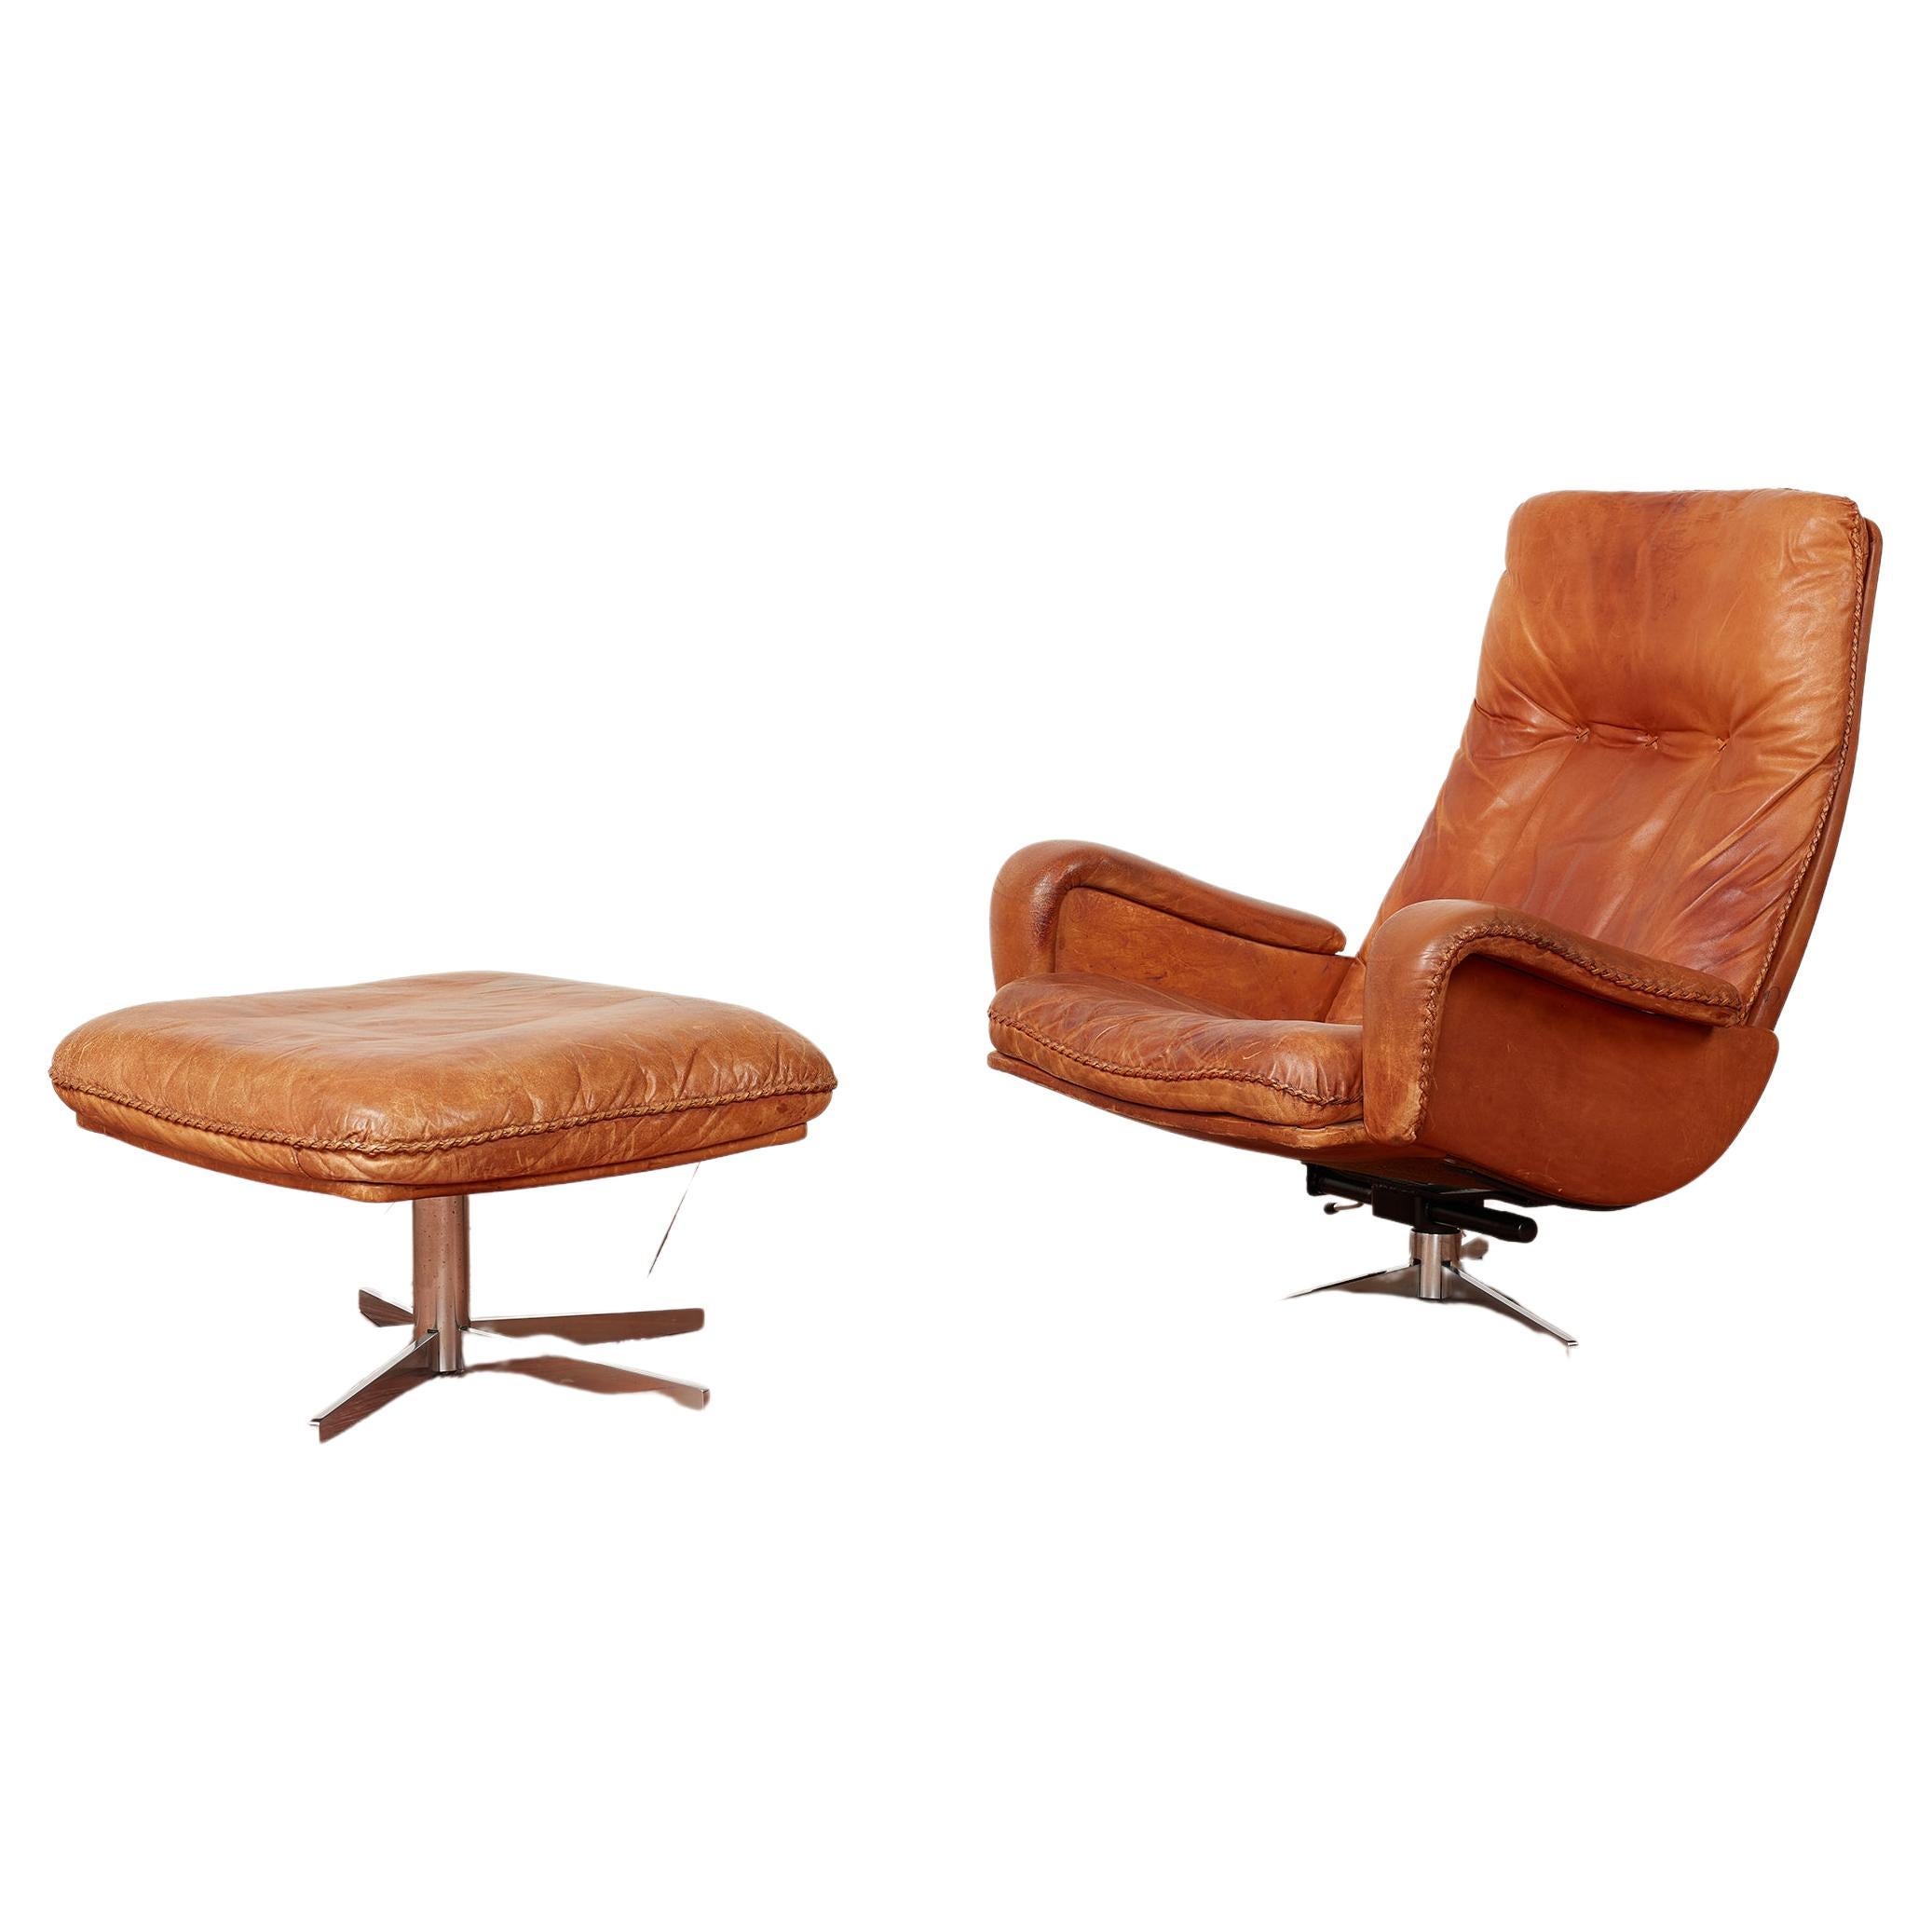 Leather lounge chair with matching ottoman by De Sede, Switzerland circa 1960s
Great soft caramel leather with signature whipstitching
Matching swivel bases and curved arms.


